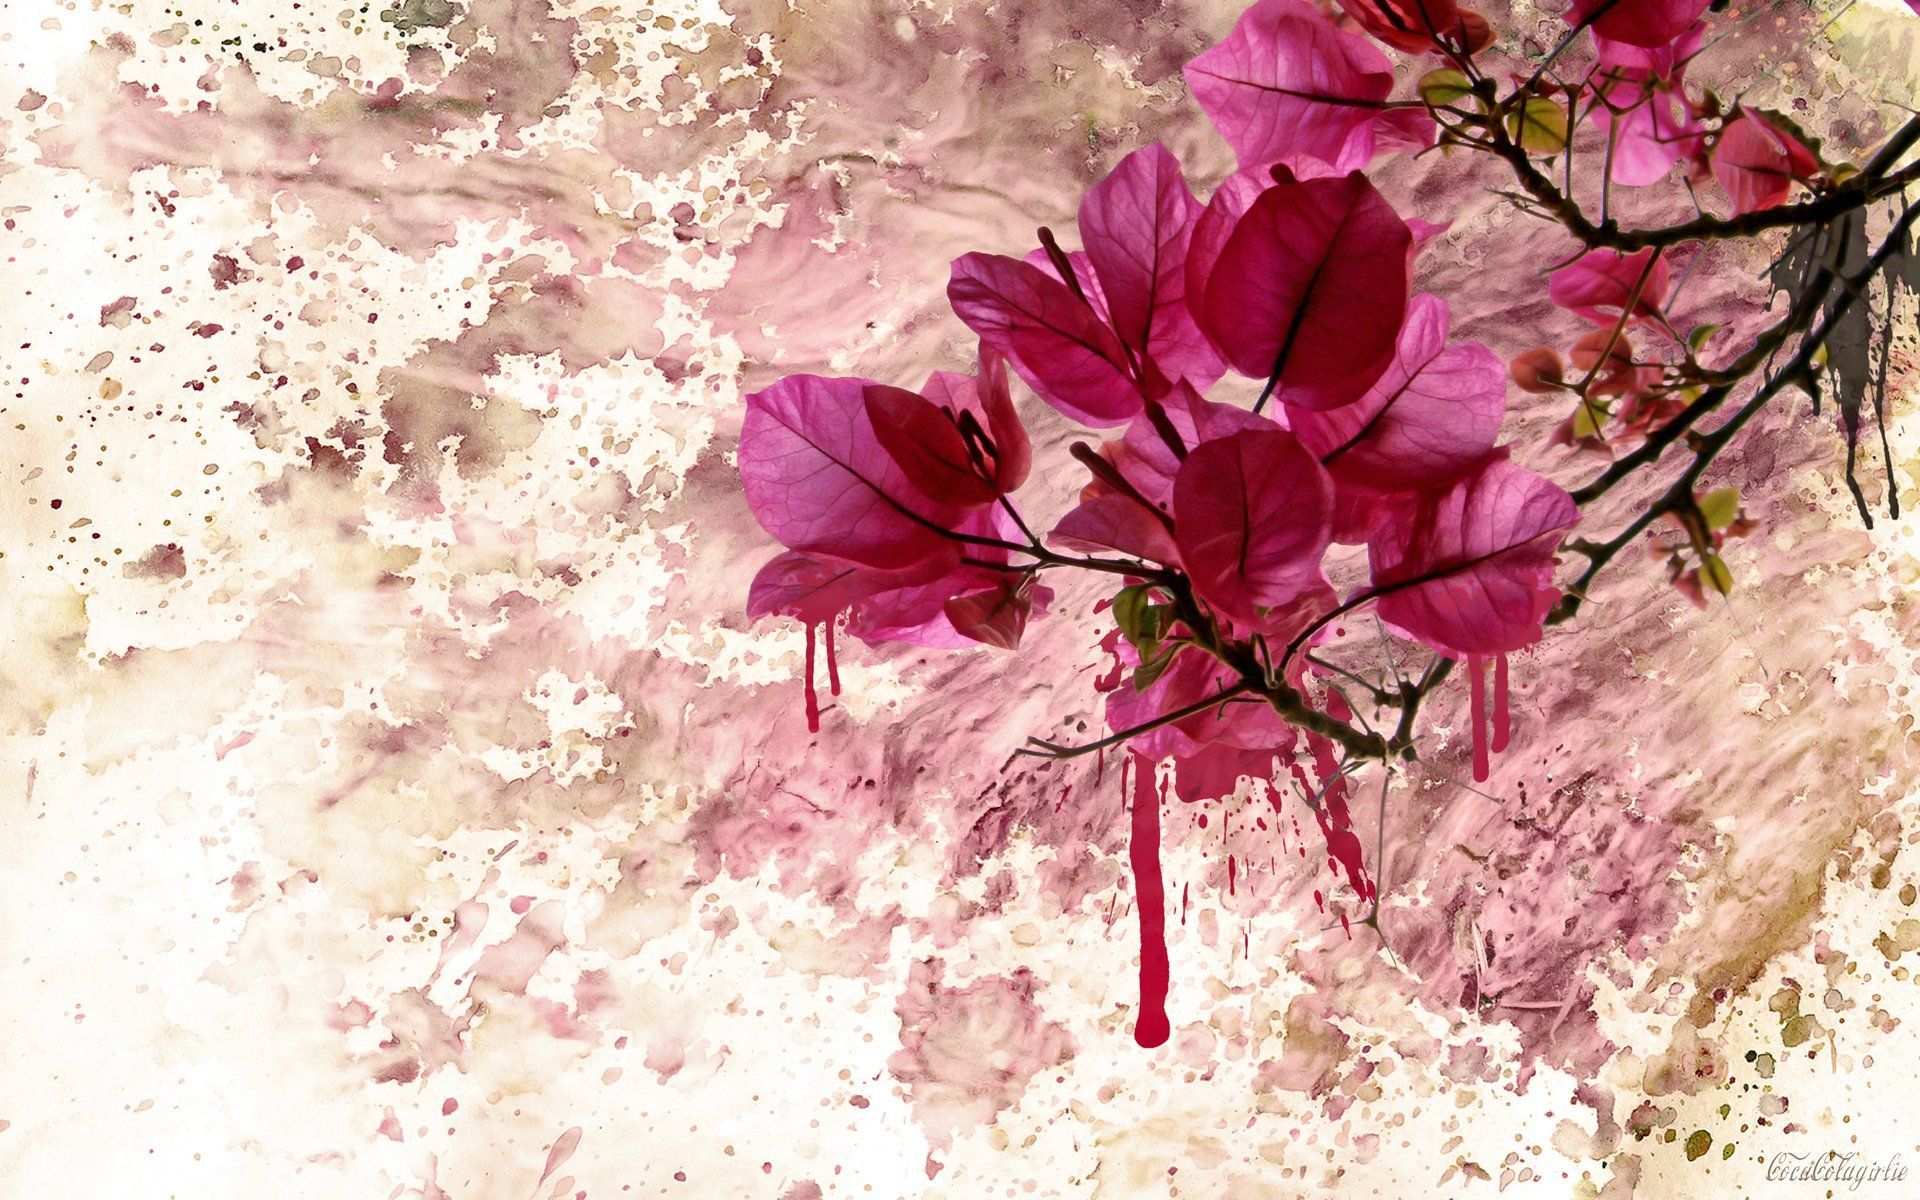 Flower Art Paint. Flower art painting, Flower art, Flower painting